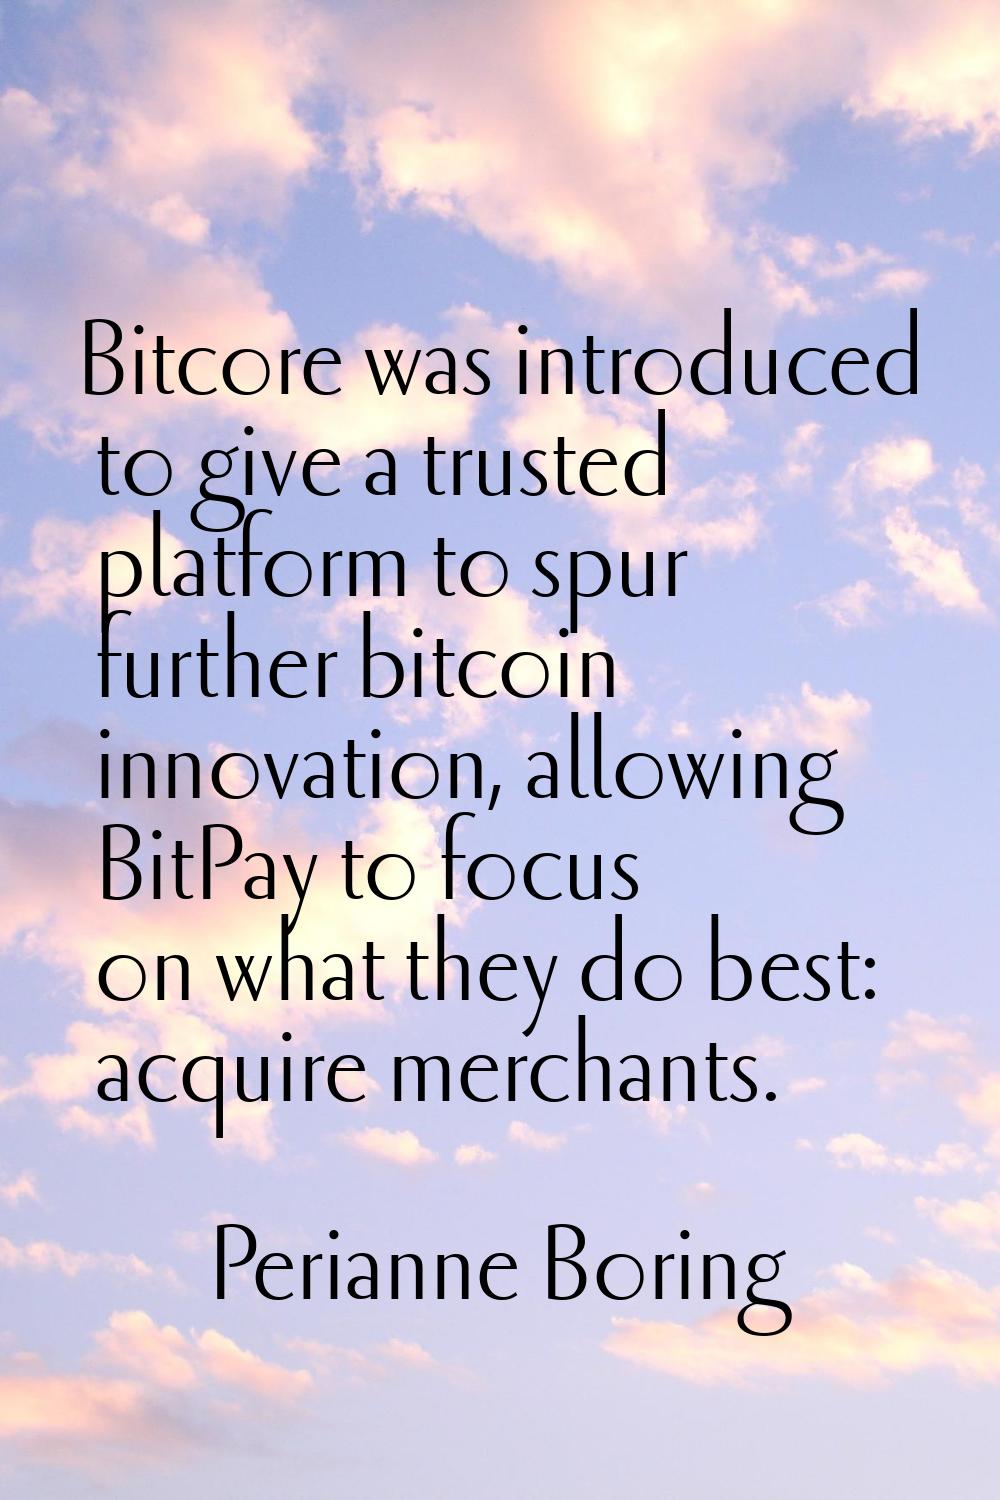 Bitcore was introduced to give a trusted platform to spur further bitcoin innovation, allowing BitP